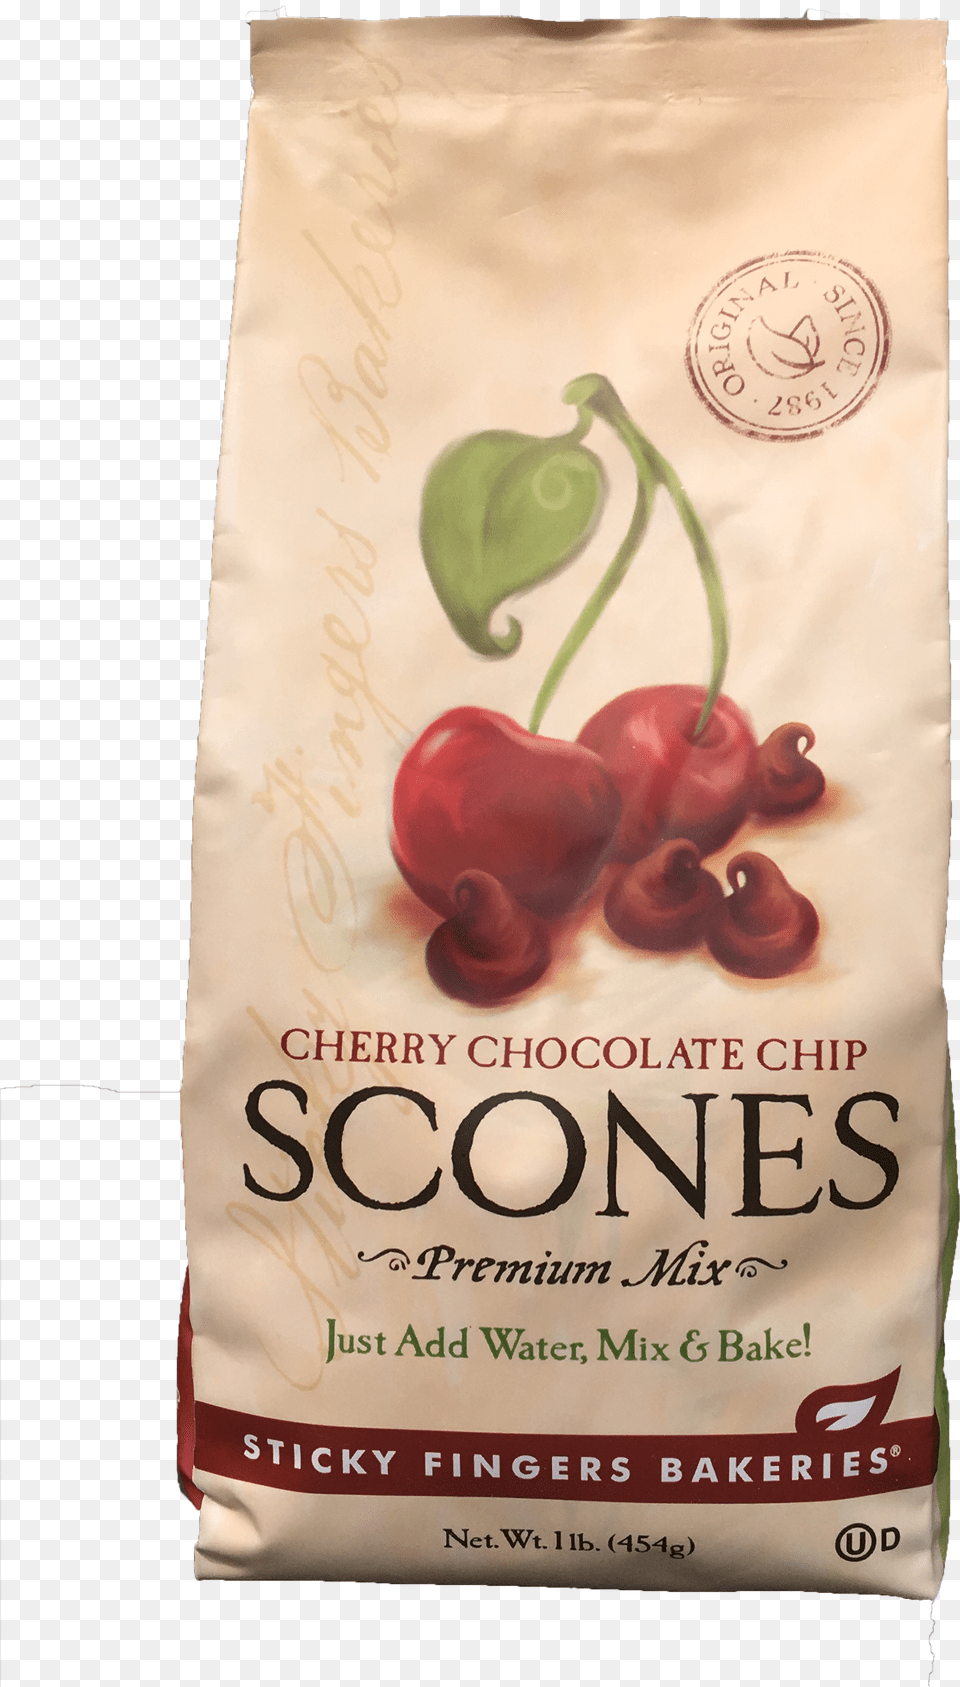 Sticky Fingers Bakery Scones Free Png